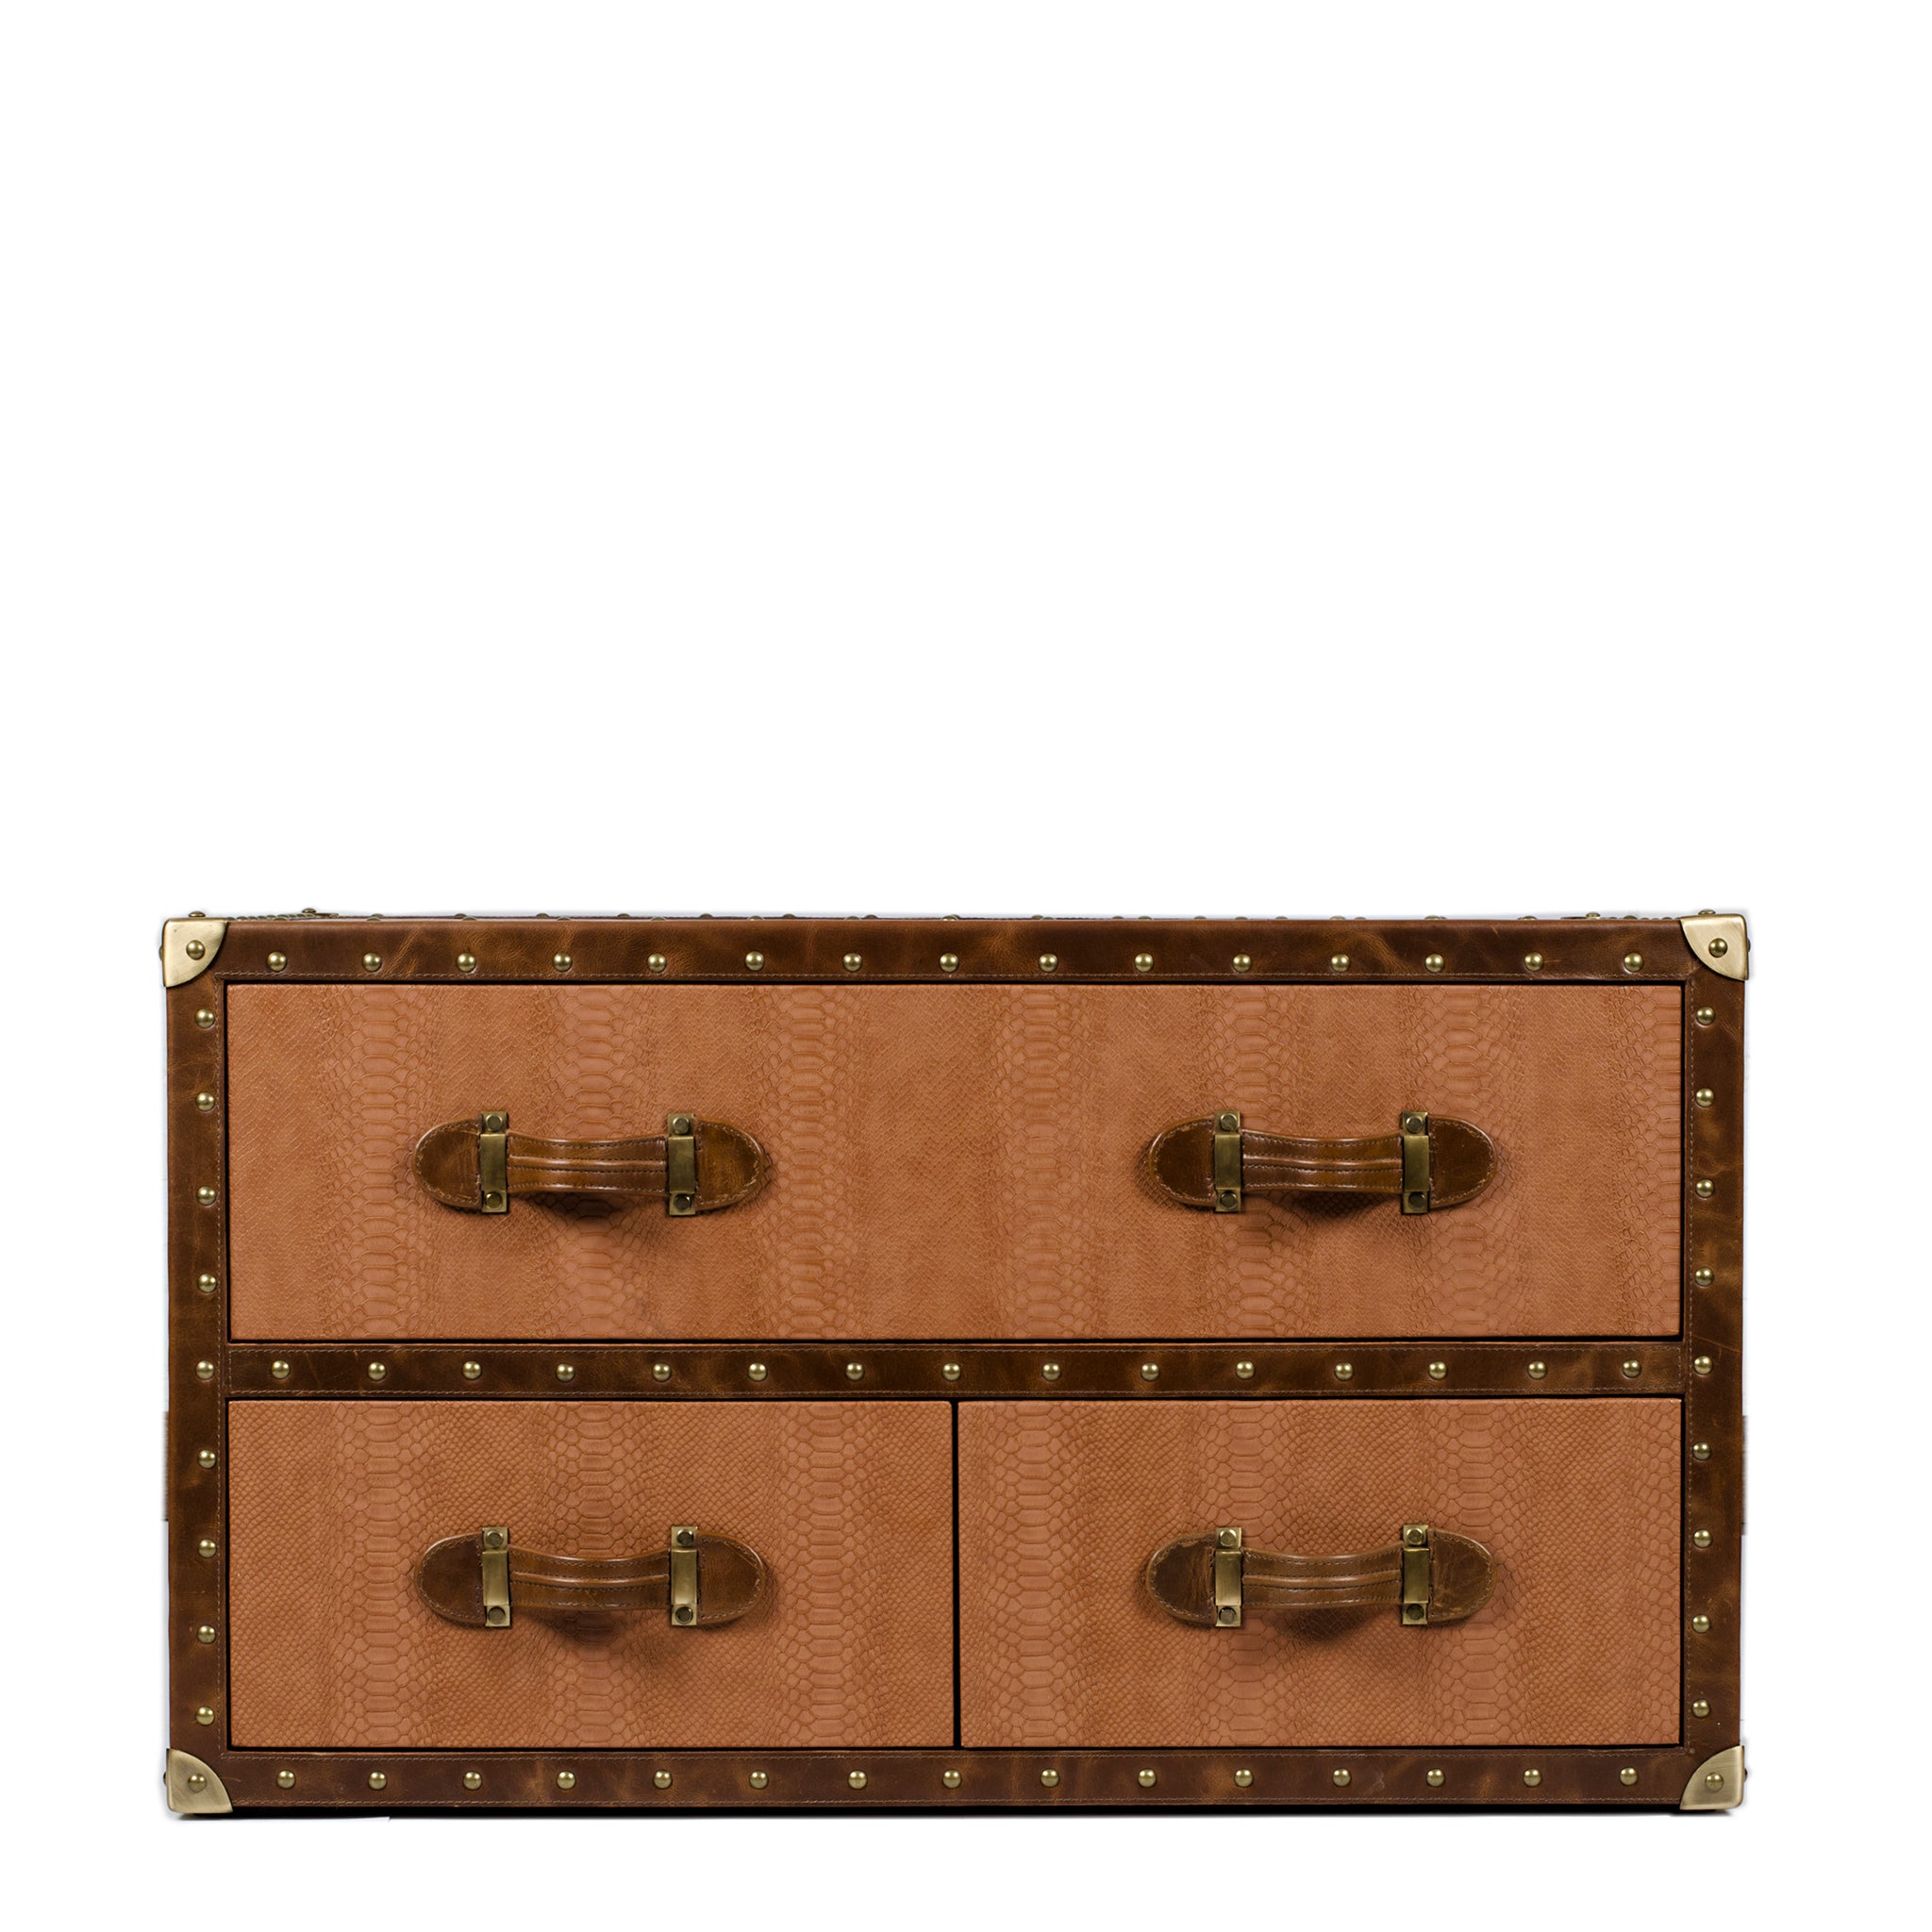 Leather Vintage Trunk Coffee Table - Tan